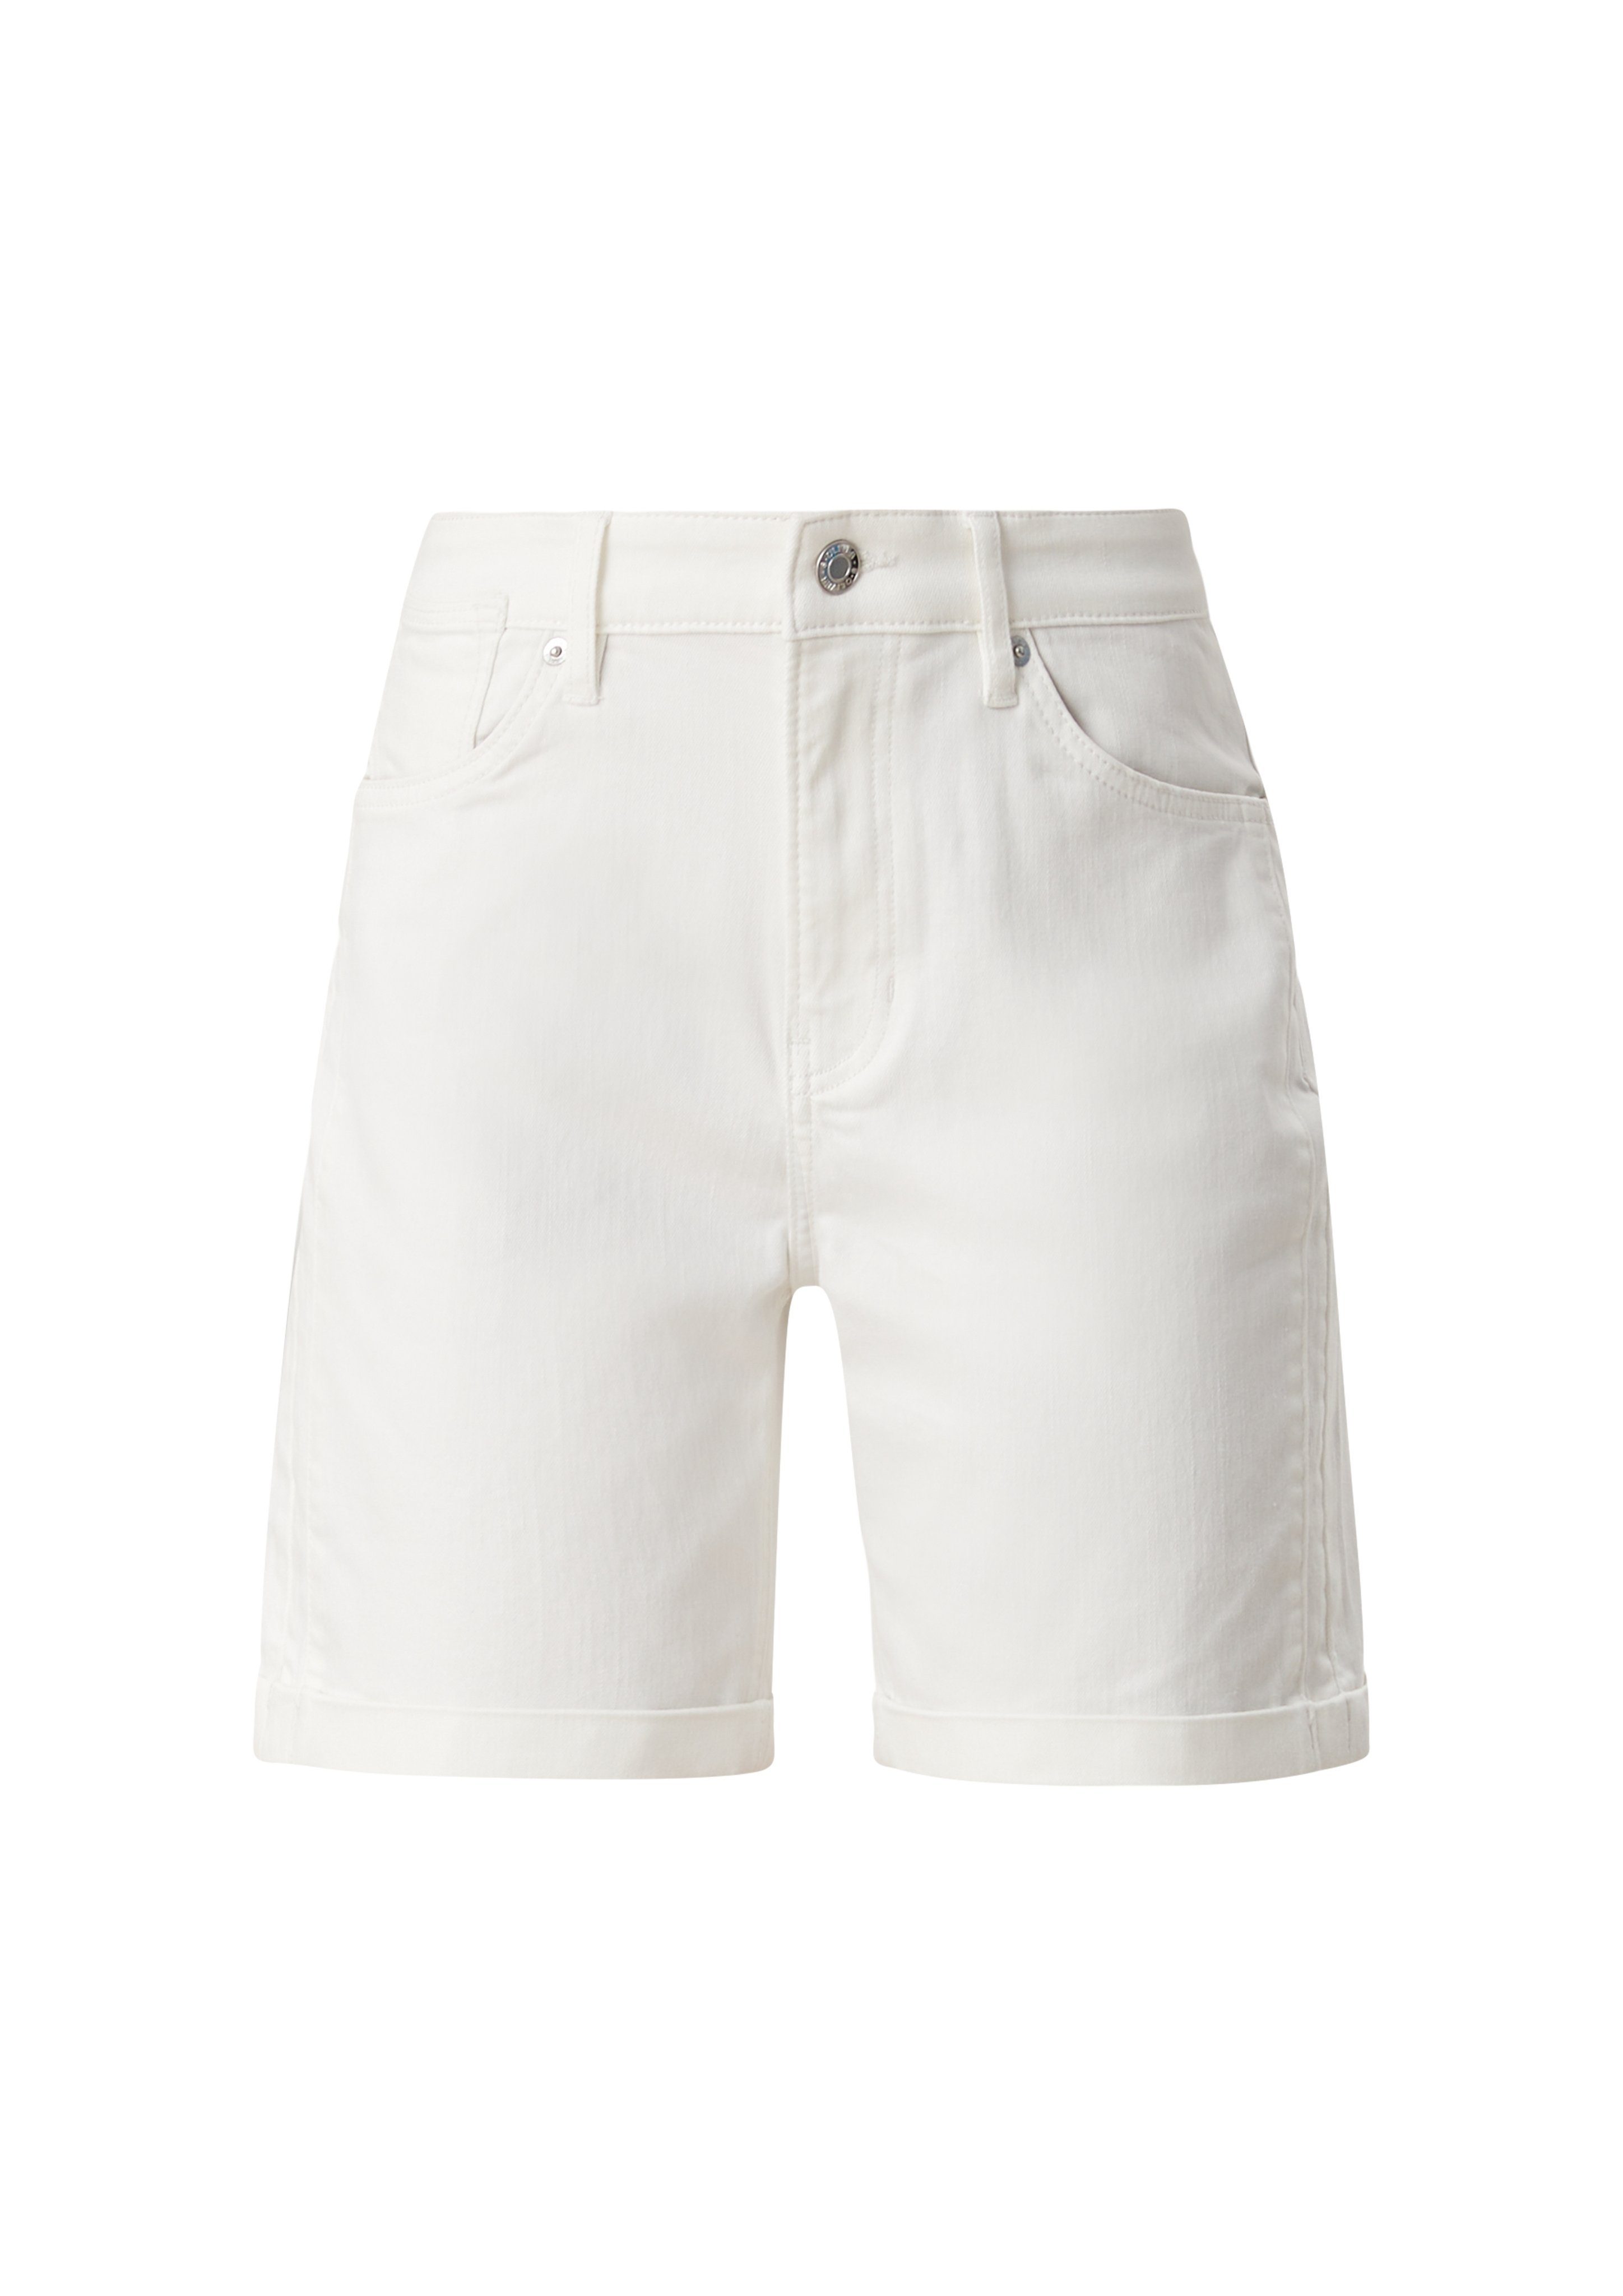 / Trunk Fit Franciz / Relaxed Wide s.Oliver Rise / Jeans-Shorts Leg Mid